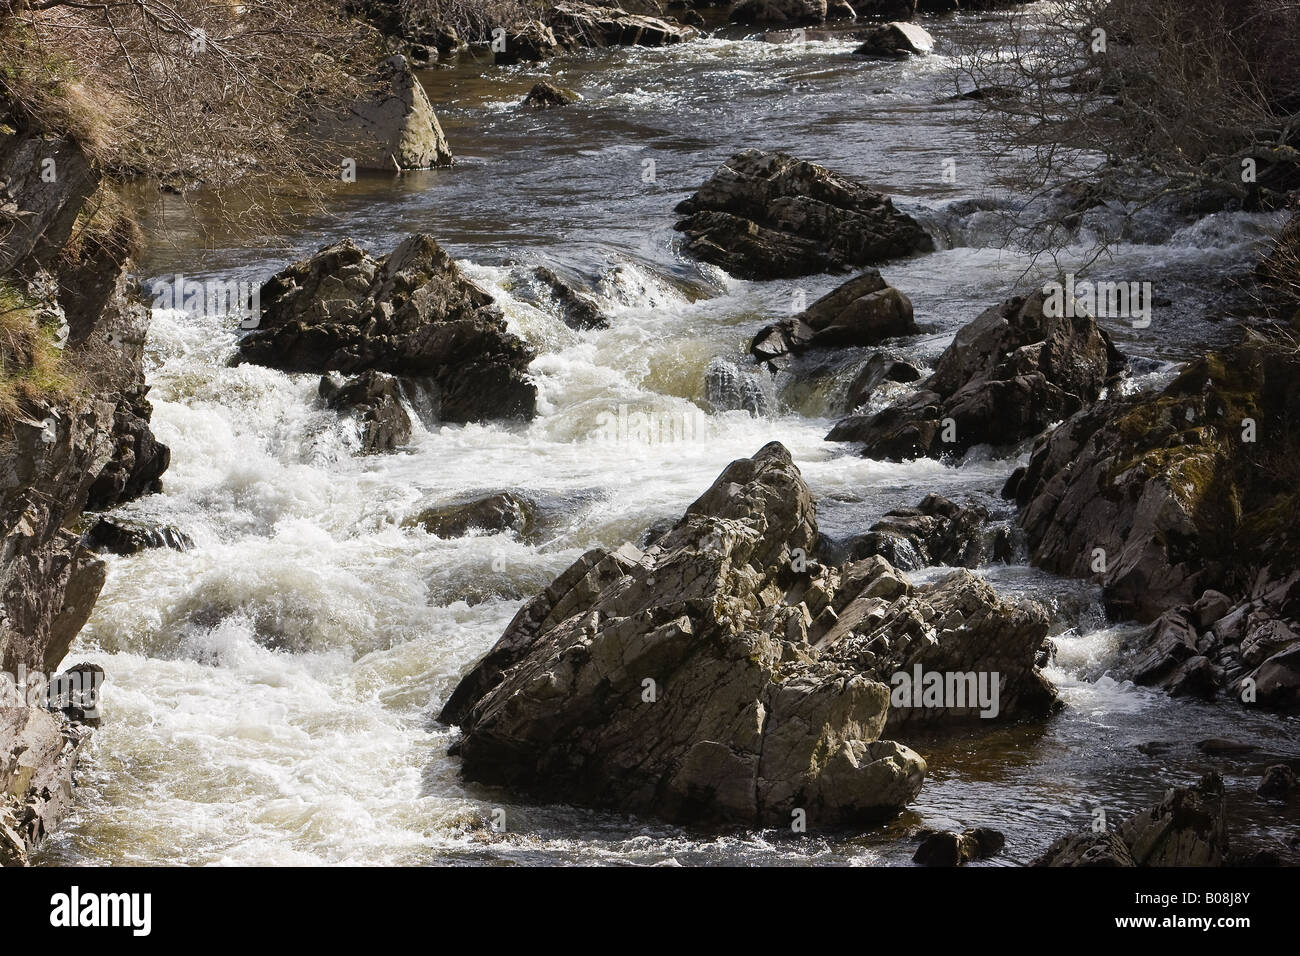 Water falling at the river Clunie as it passes Braemar on its way to joining the river Dee Stock Photo